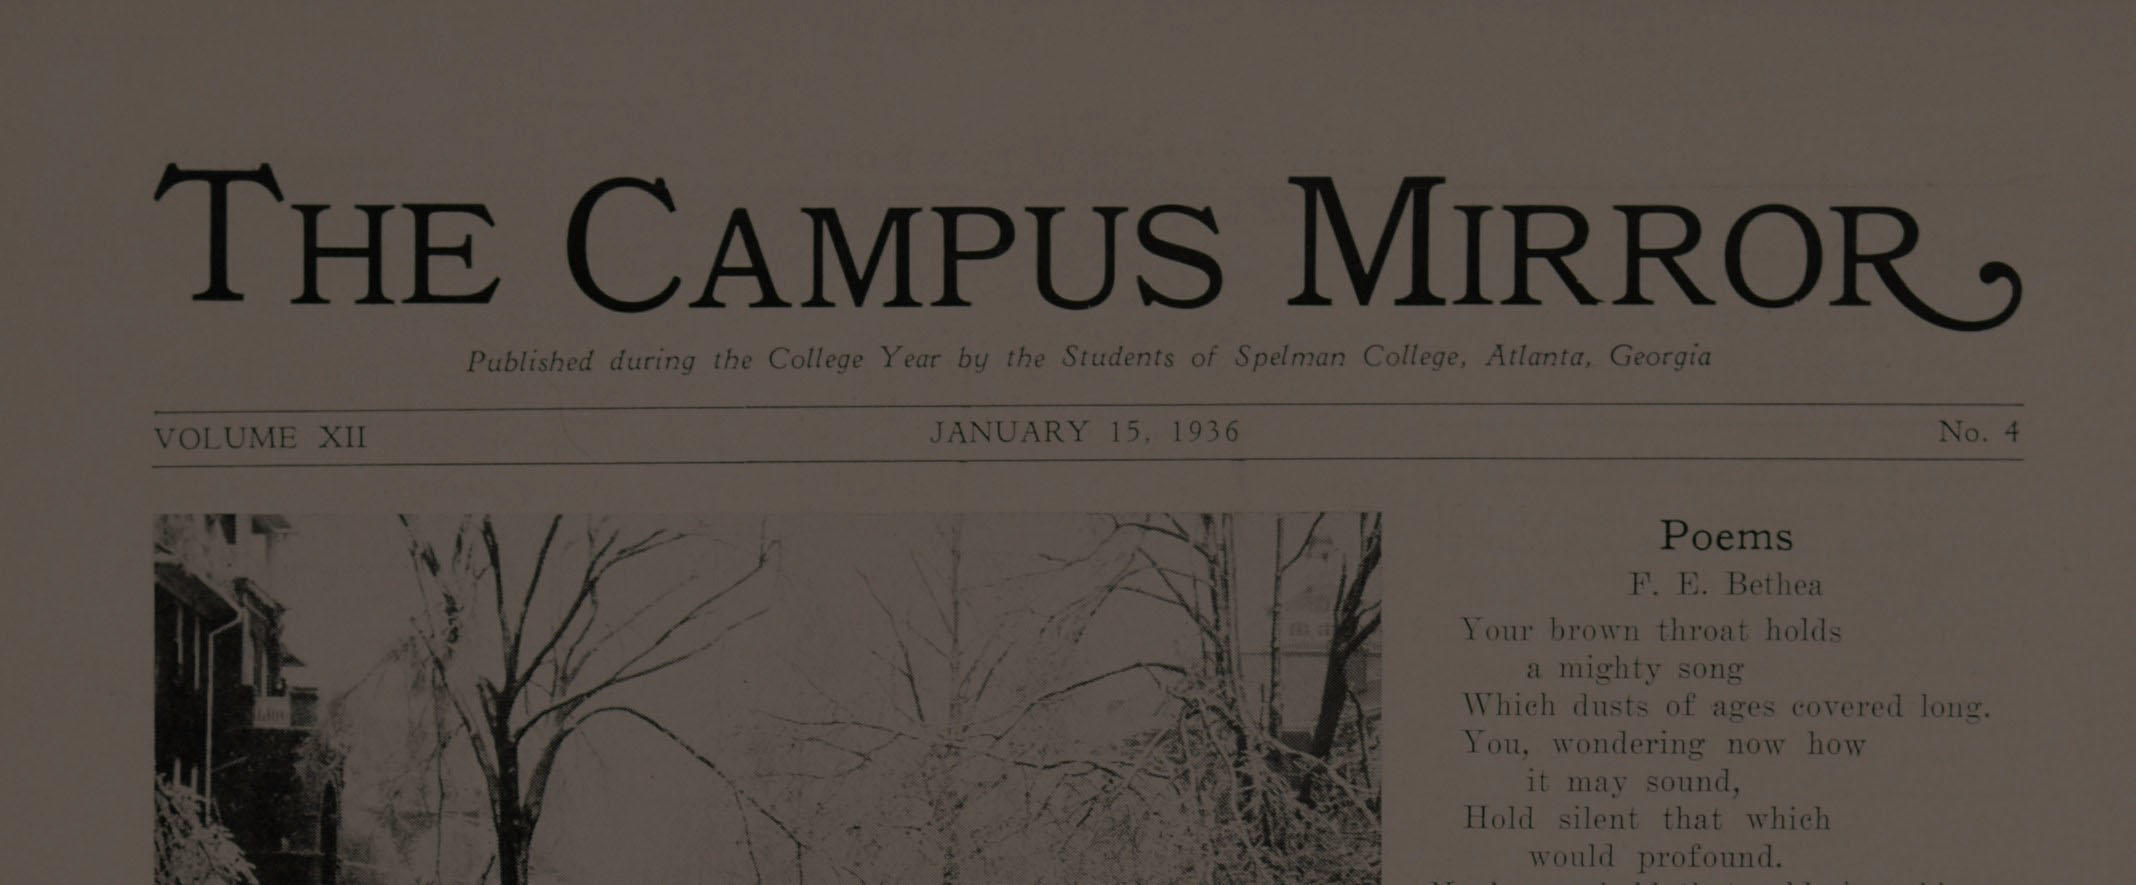 First published in October 1924, The Campus Mirror was a monthly newspaper managed and edited by the students of Spelman College. The paper featured editorials, campus news, events, speeches, local advertisements, and photographs of classes and organizations. In addition to its news coverage, literary works by students and advice for interviews or studying could be found in the Mirror's pages. A special commencement issue was published at the end of each academic year. These issues included photographs and covered the graduating and incoming classes. The newspaper's final issue circulated in May 1950 after 26 years of covering campus life.